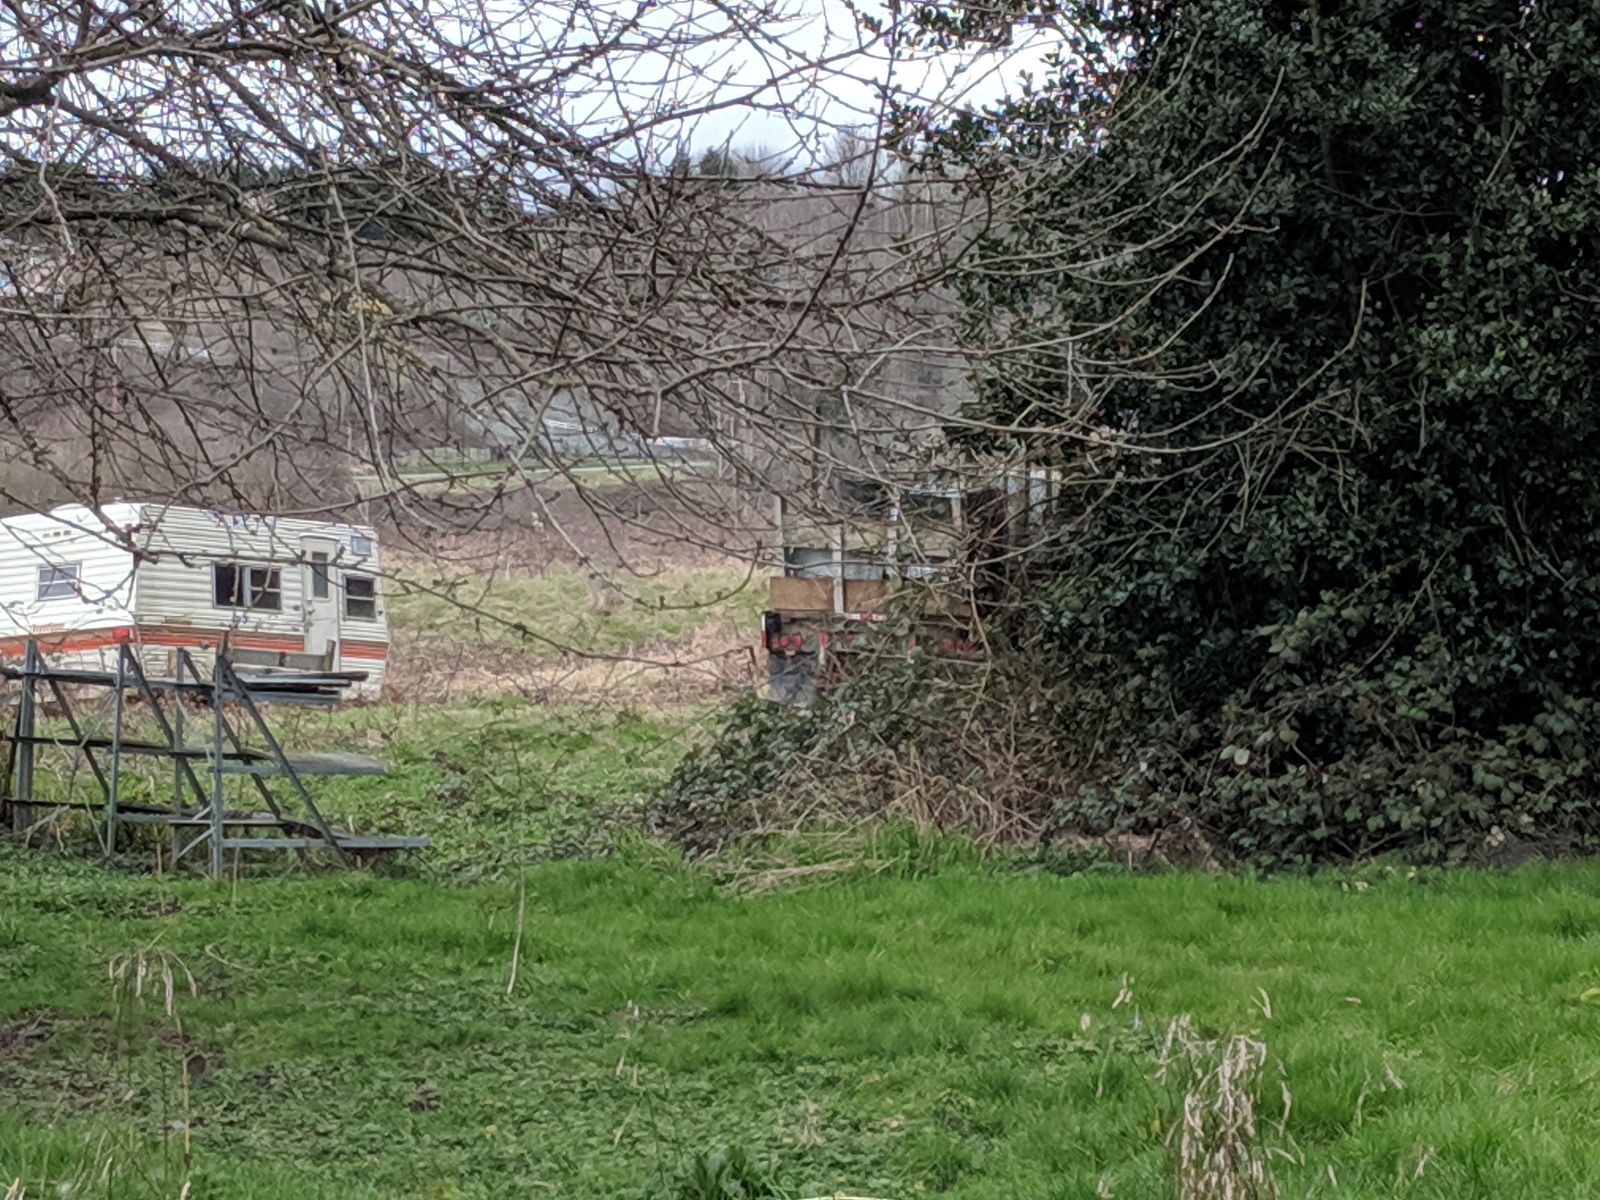 Camping trailer that looks like it hasn’t even been here for one season. And a commercial dump truck tucked away on the right.